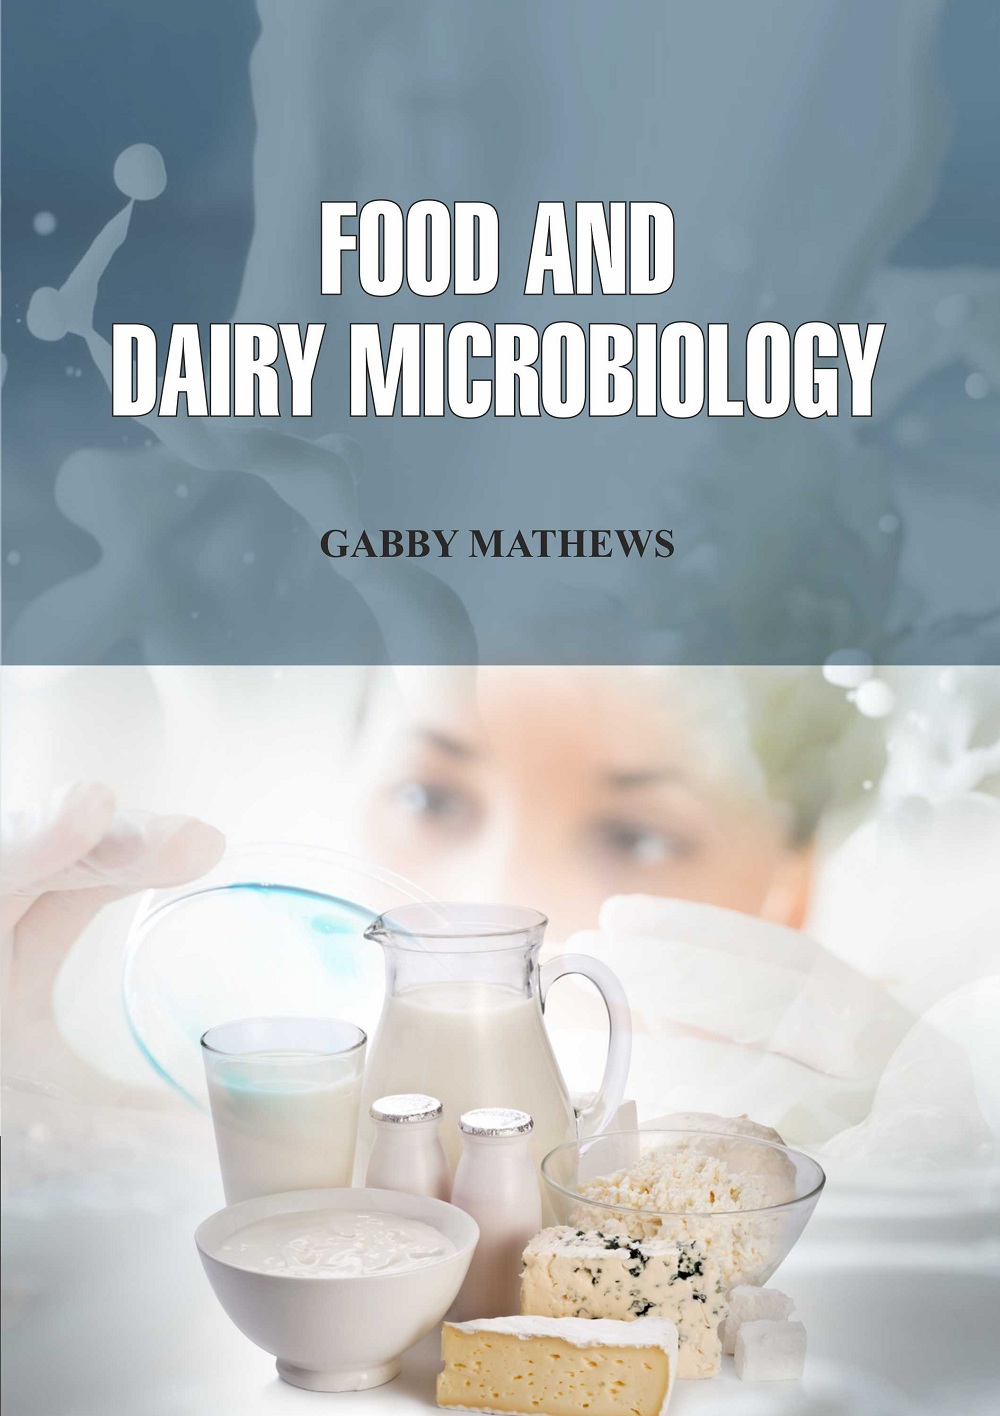 Food and Dairy Microbiology